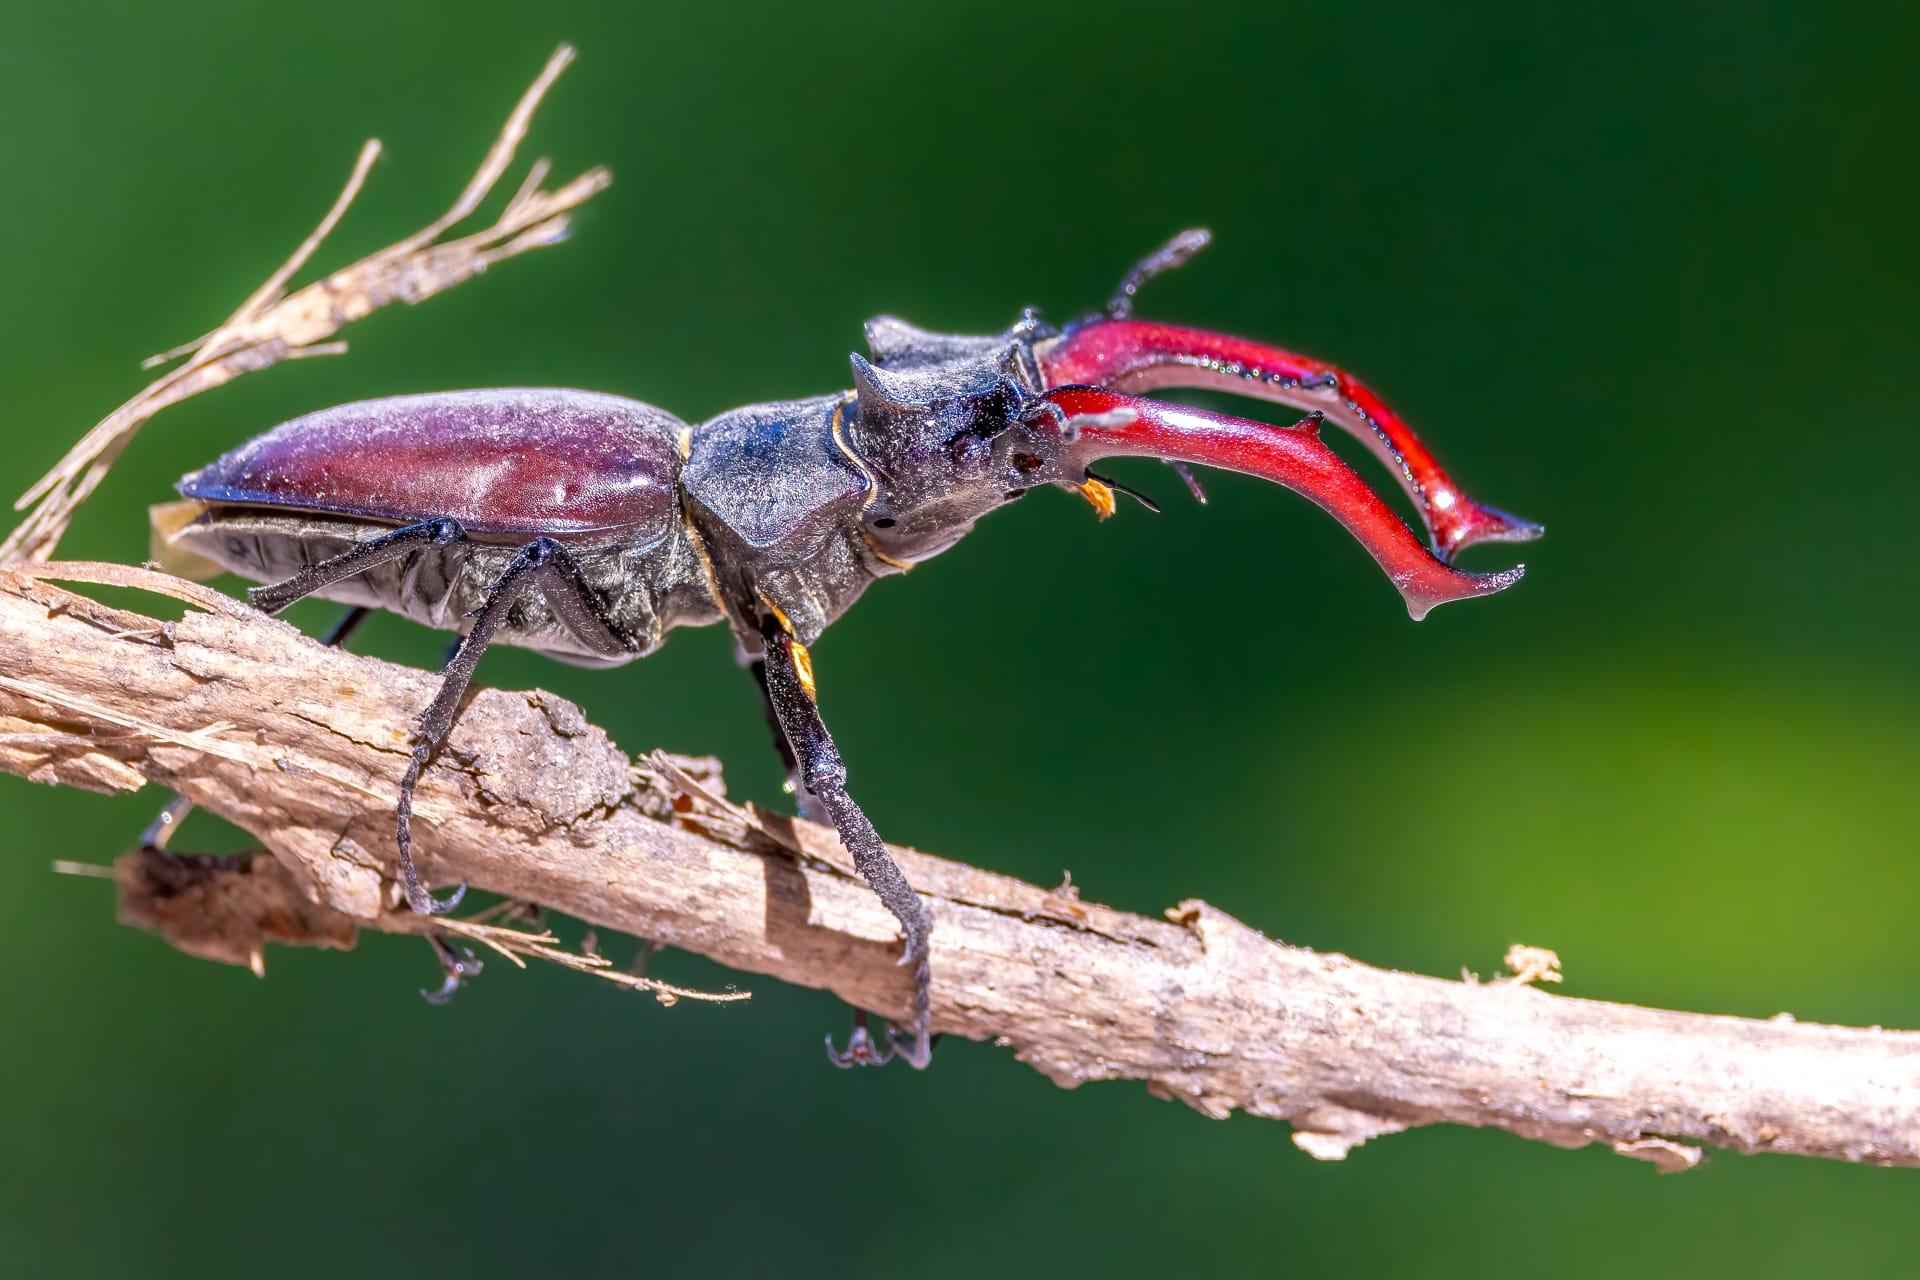 Stag beetle pictures